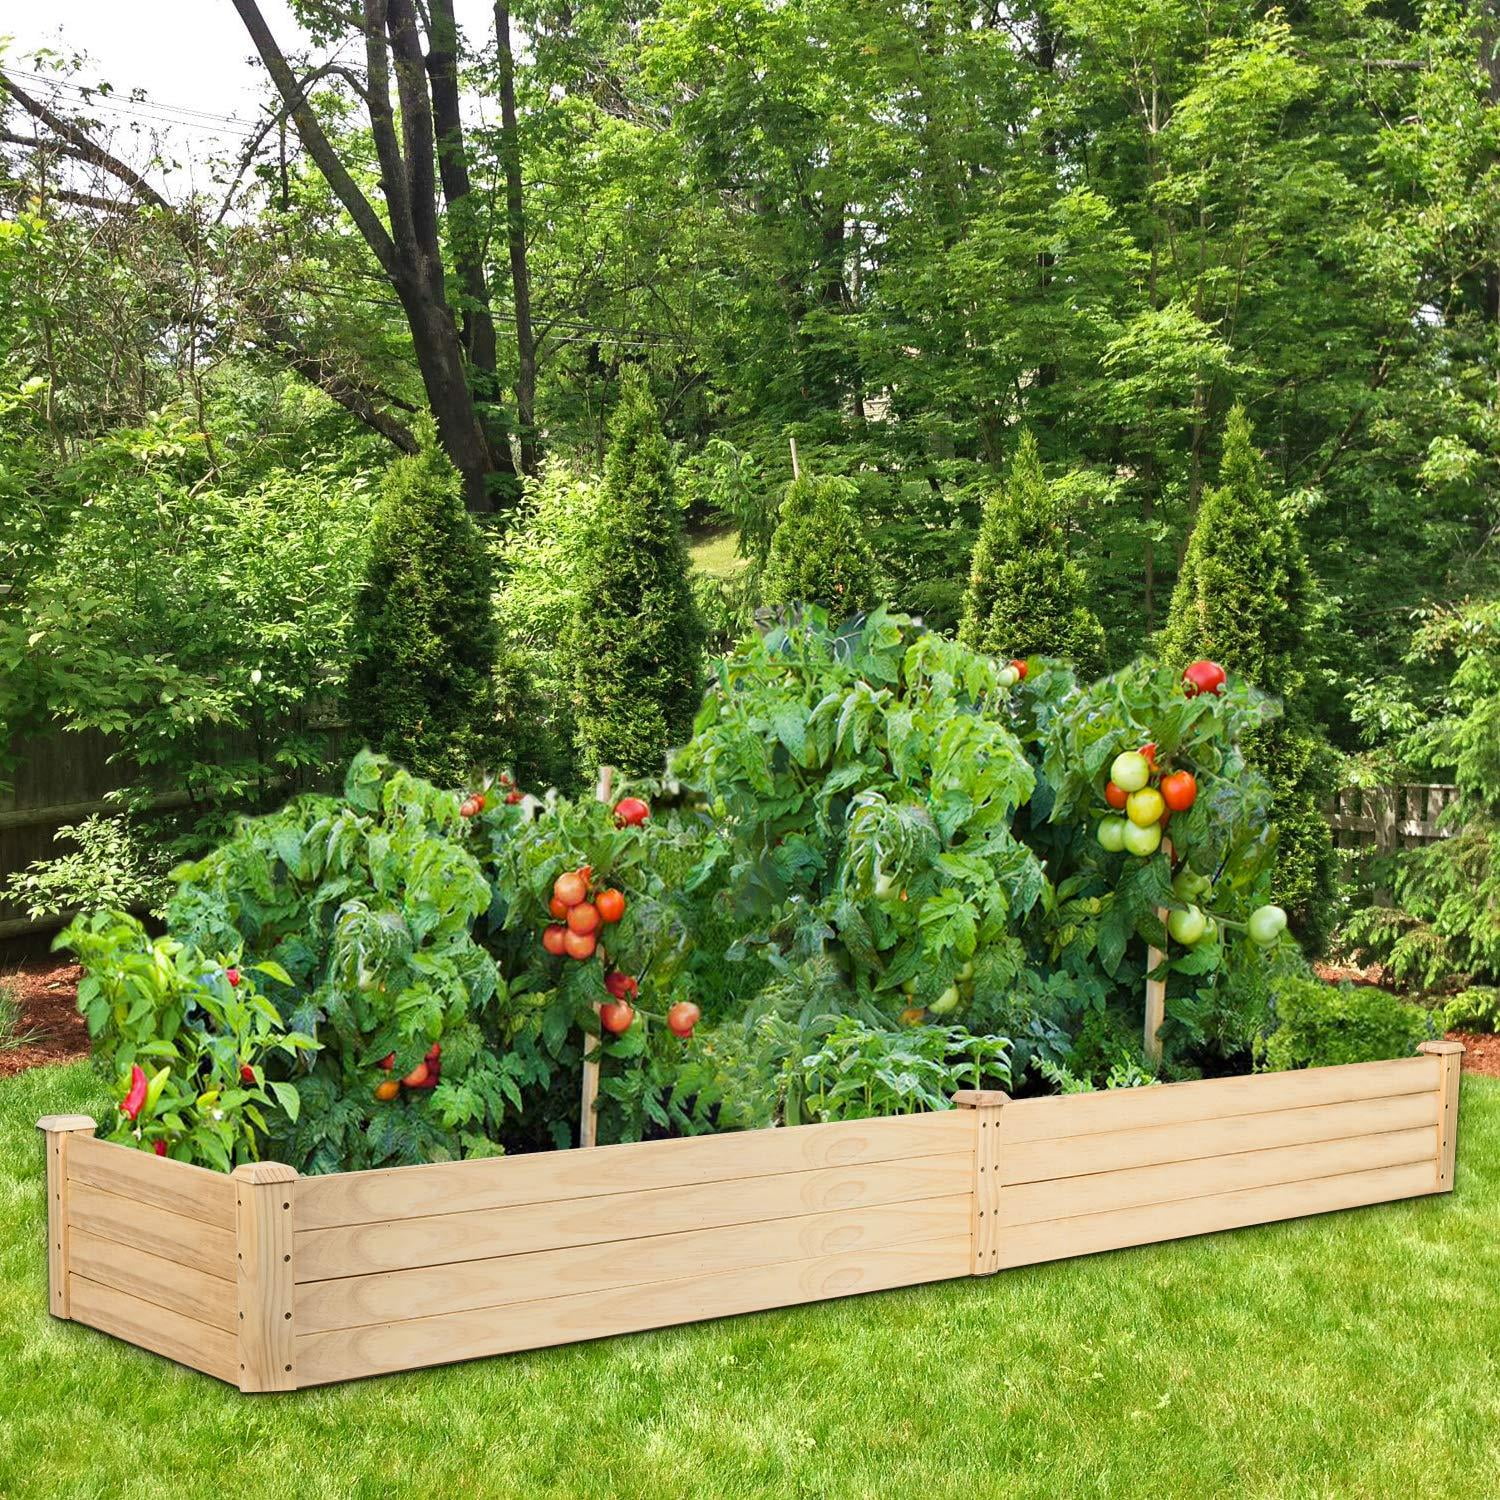 Canditree Wooden Raised Bed for Flowers 39.3x11.8x9.8 Vegetables Outdoor Planter Box Gardening for Patio Lawn Backyard 